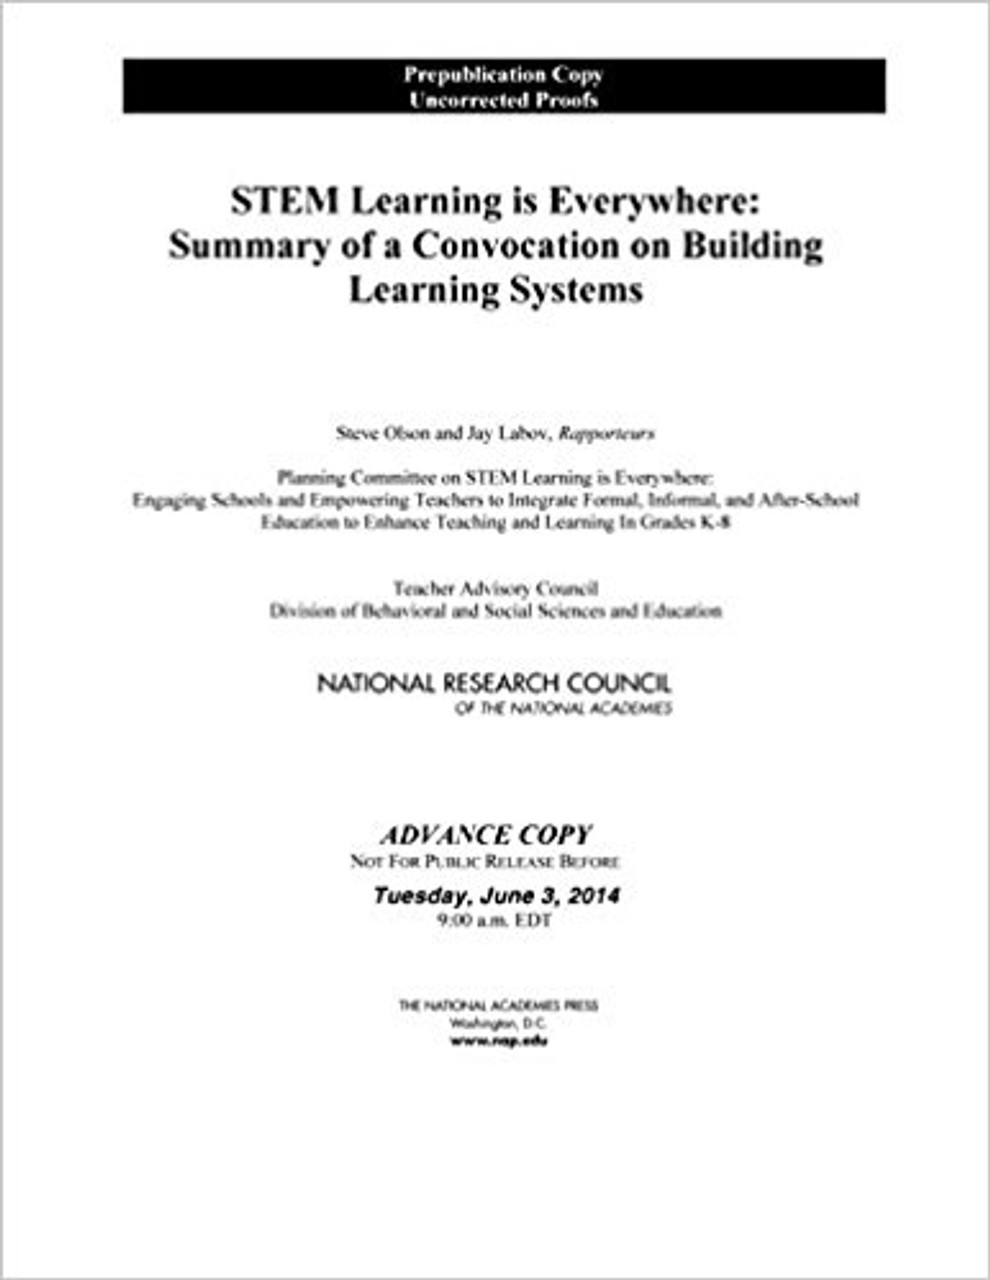 STEM Learning is Everywhere: Summary of a Convocation on Building Learning Systems by National Research Council